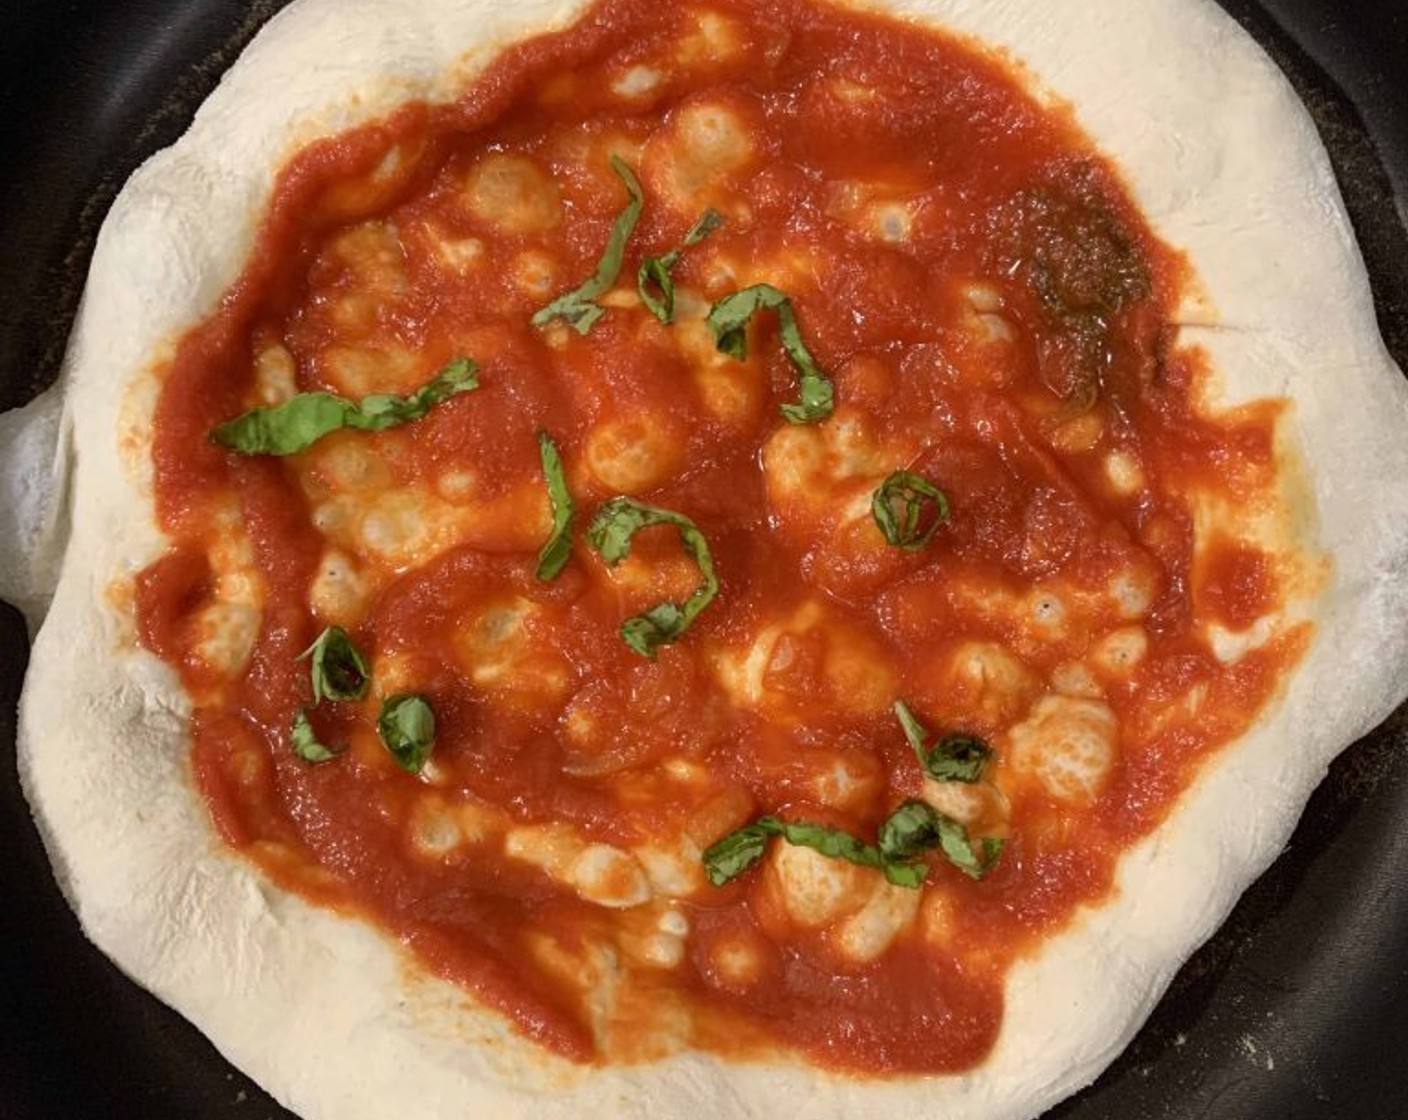 step 11 Meanwhile bring a large skillet on the stove, high heat, when hot transfer the disc of dough, quickly spread Tomato Sauce (3/4 cup), try to be fast to avoid the center growing high. Add some sliced Fresh Basil (to taste) and cook it on medium-high.